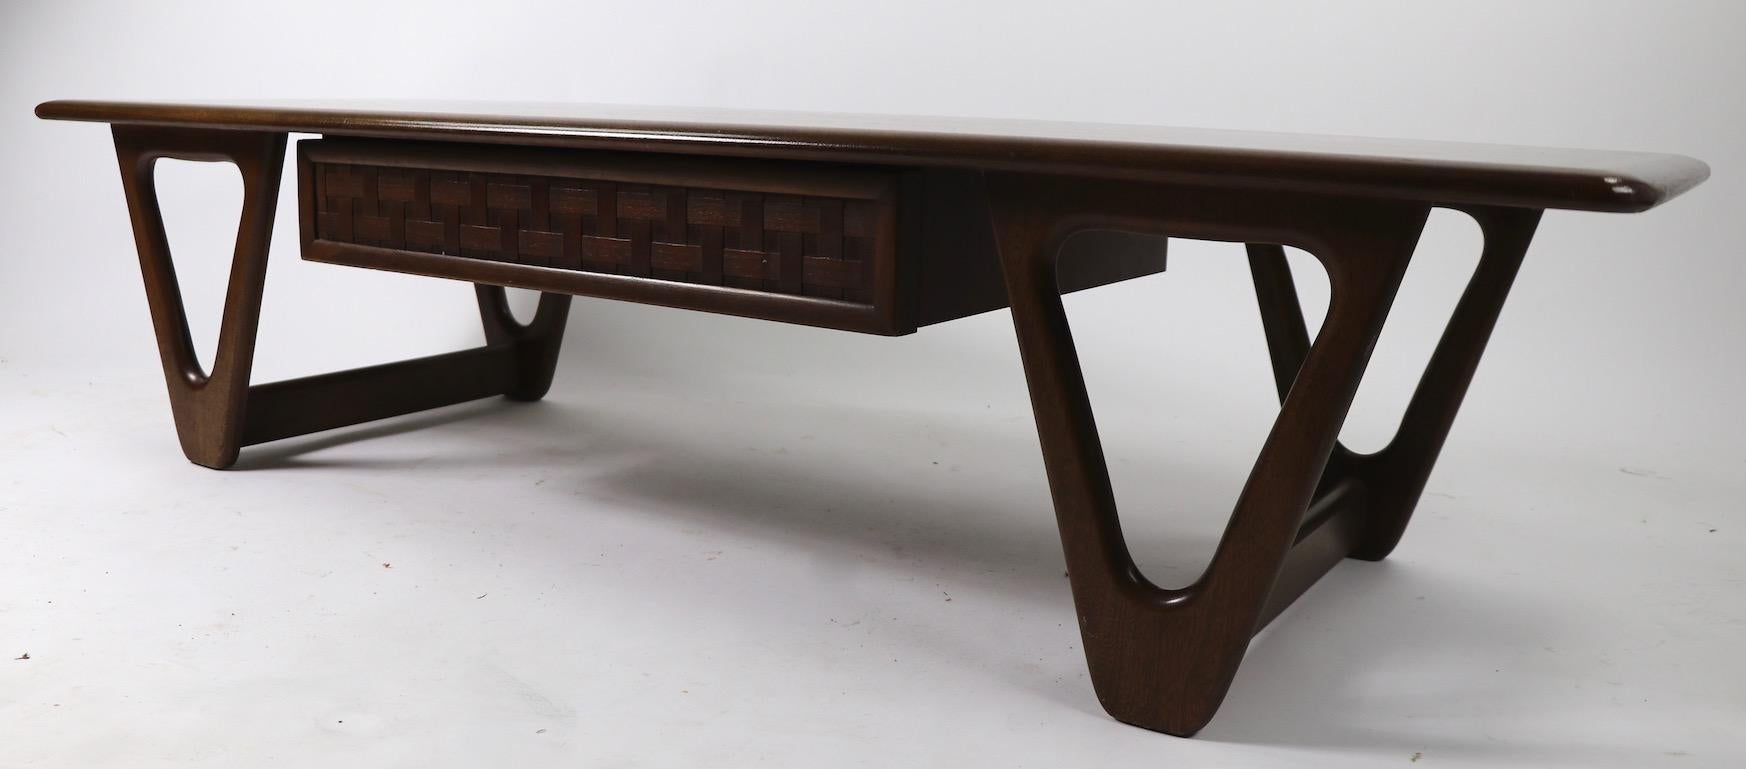 Classic Mid-Century Modern coffee table, perception line, manufactured by Lane Furniture. The table has one drawer with a weave pattern front, hairpin legs and a solid board top. This example is in good original condition but does show some cosmetic